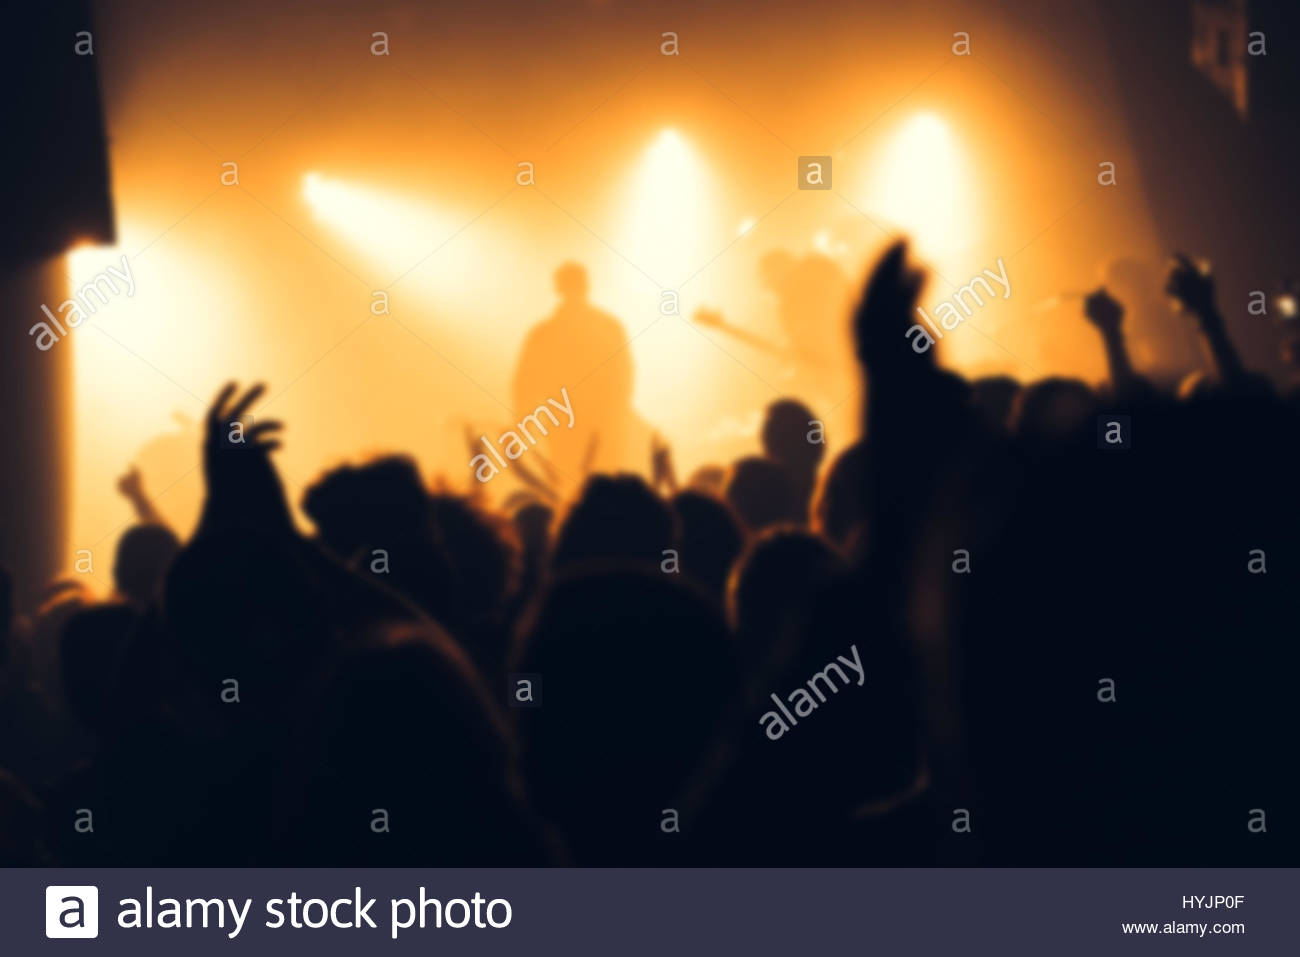 Blur Defocused Concert Crowd As Abstract Background People At